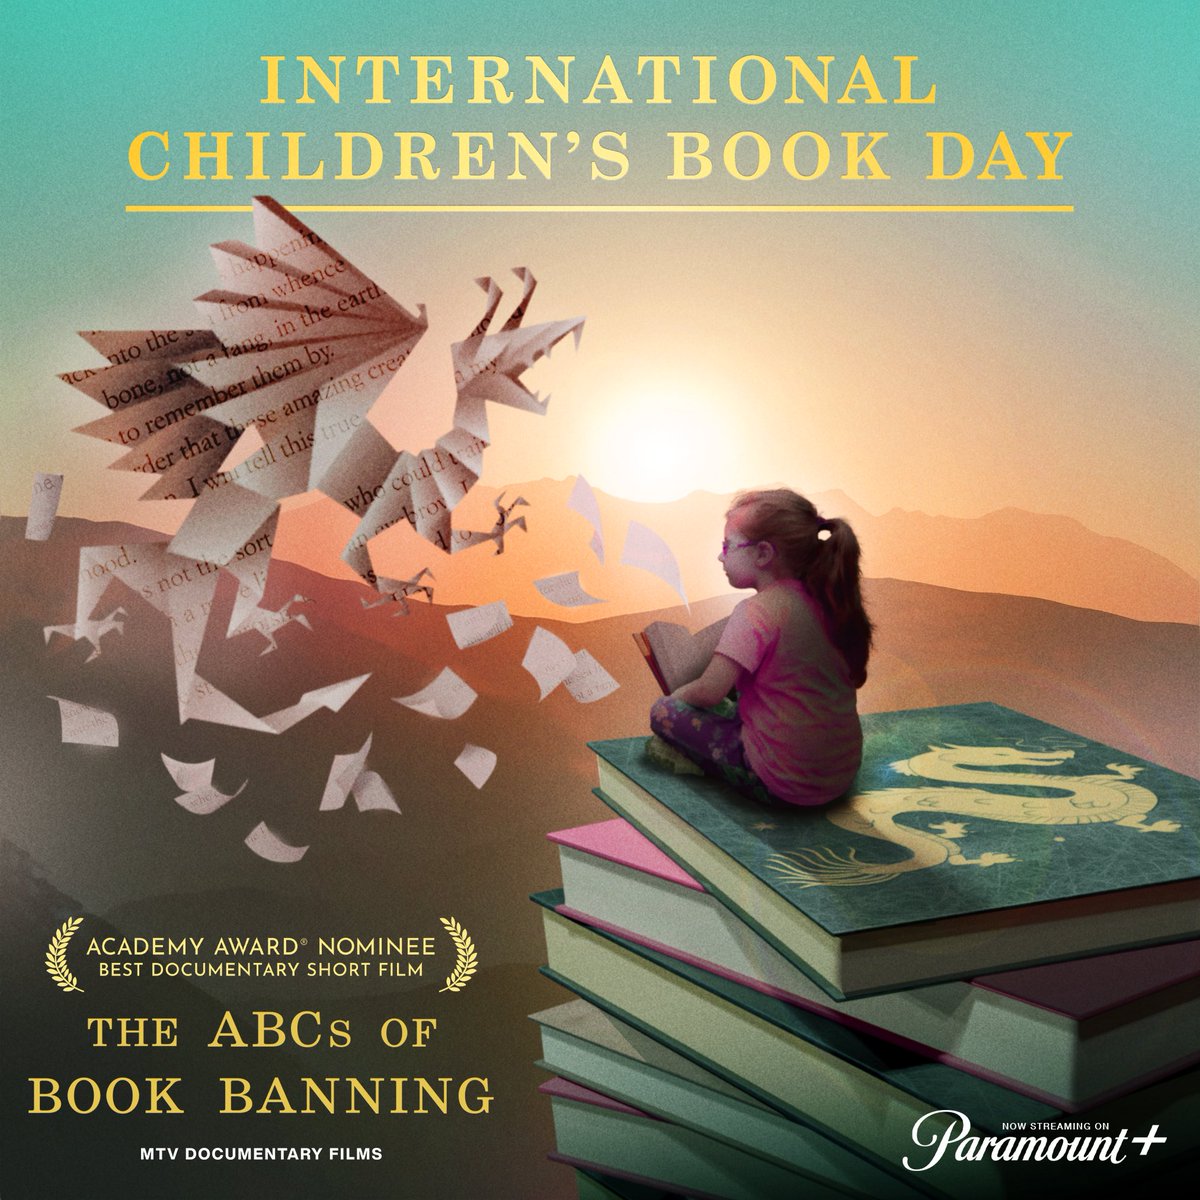 On International Children’s Book Day, let The ABCs OF BOOK BANNING serve as a reminder that the fight against book censorship persists. Join us in our ongoing efforts to empower young minds through literature and advocate for their future. Stream the #Oscar nominated short film…